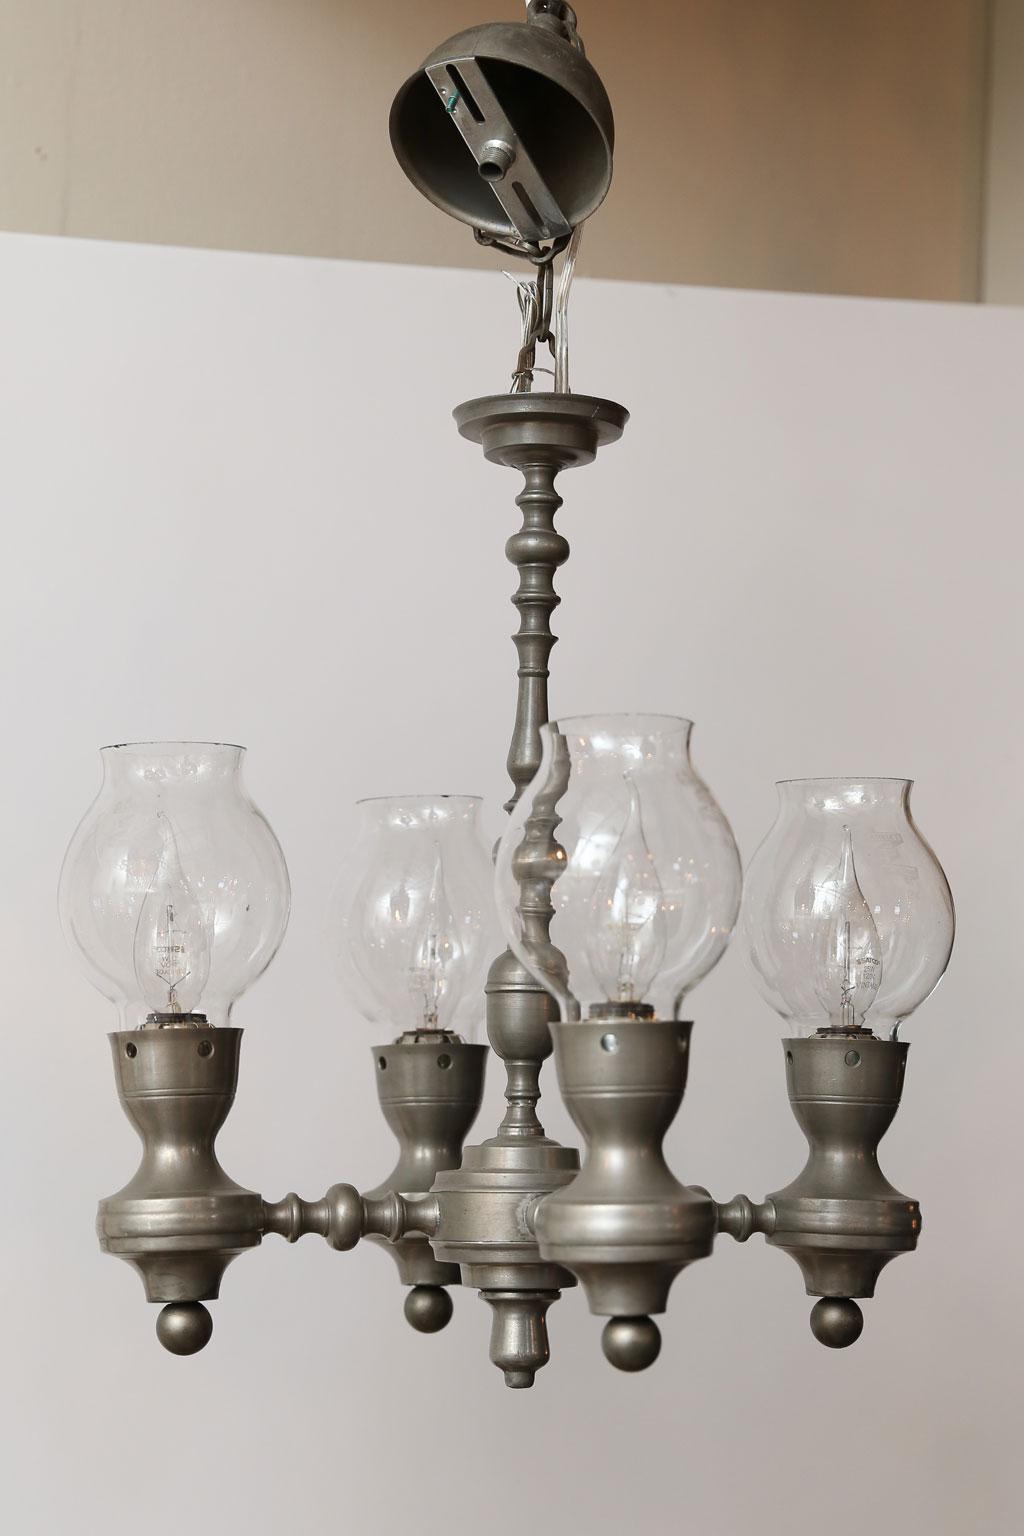 Four-arm pewter chandelier with glass shades, circa 1940. Newly wired for use within the USA. Four candelabra-size sockets. Includes chain and a canopy. The lights is a bit unusual and has a nice country or provincial feel.  I do not find this style